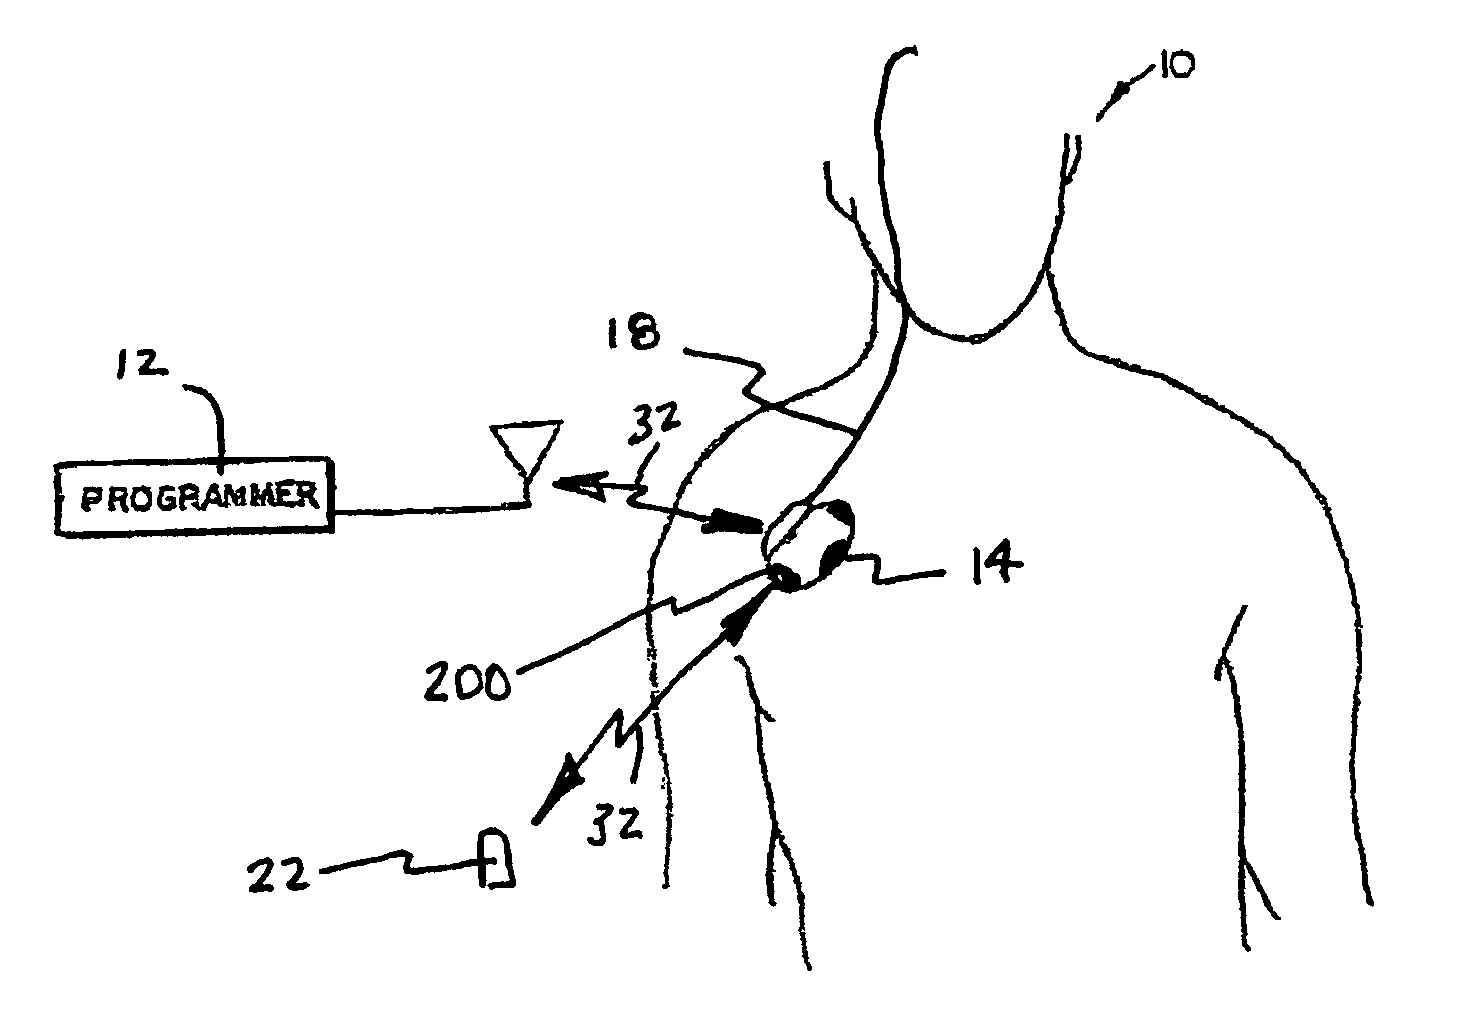 System and method for monitoring or treating nervous system disorders